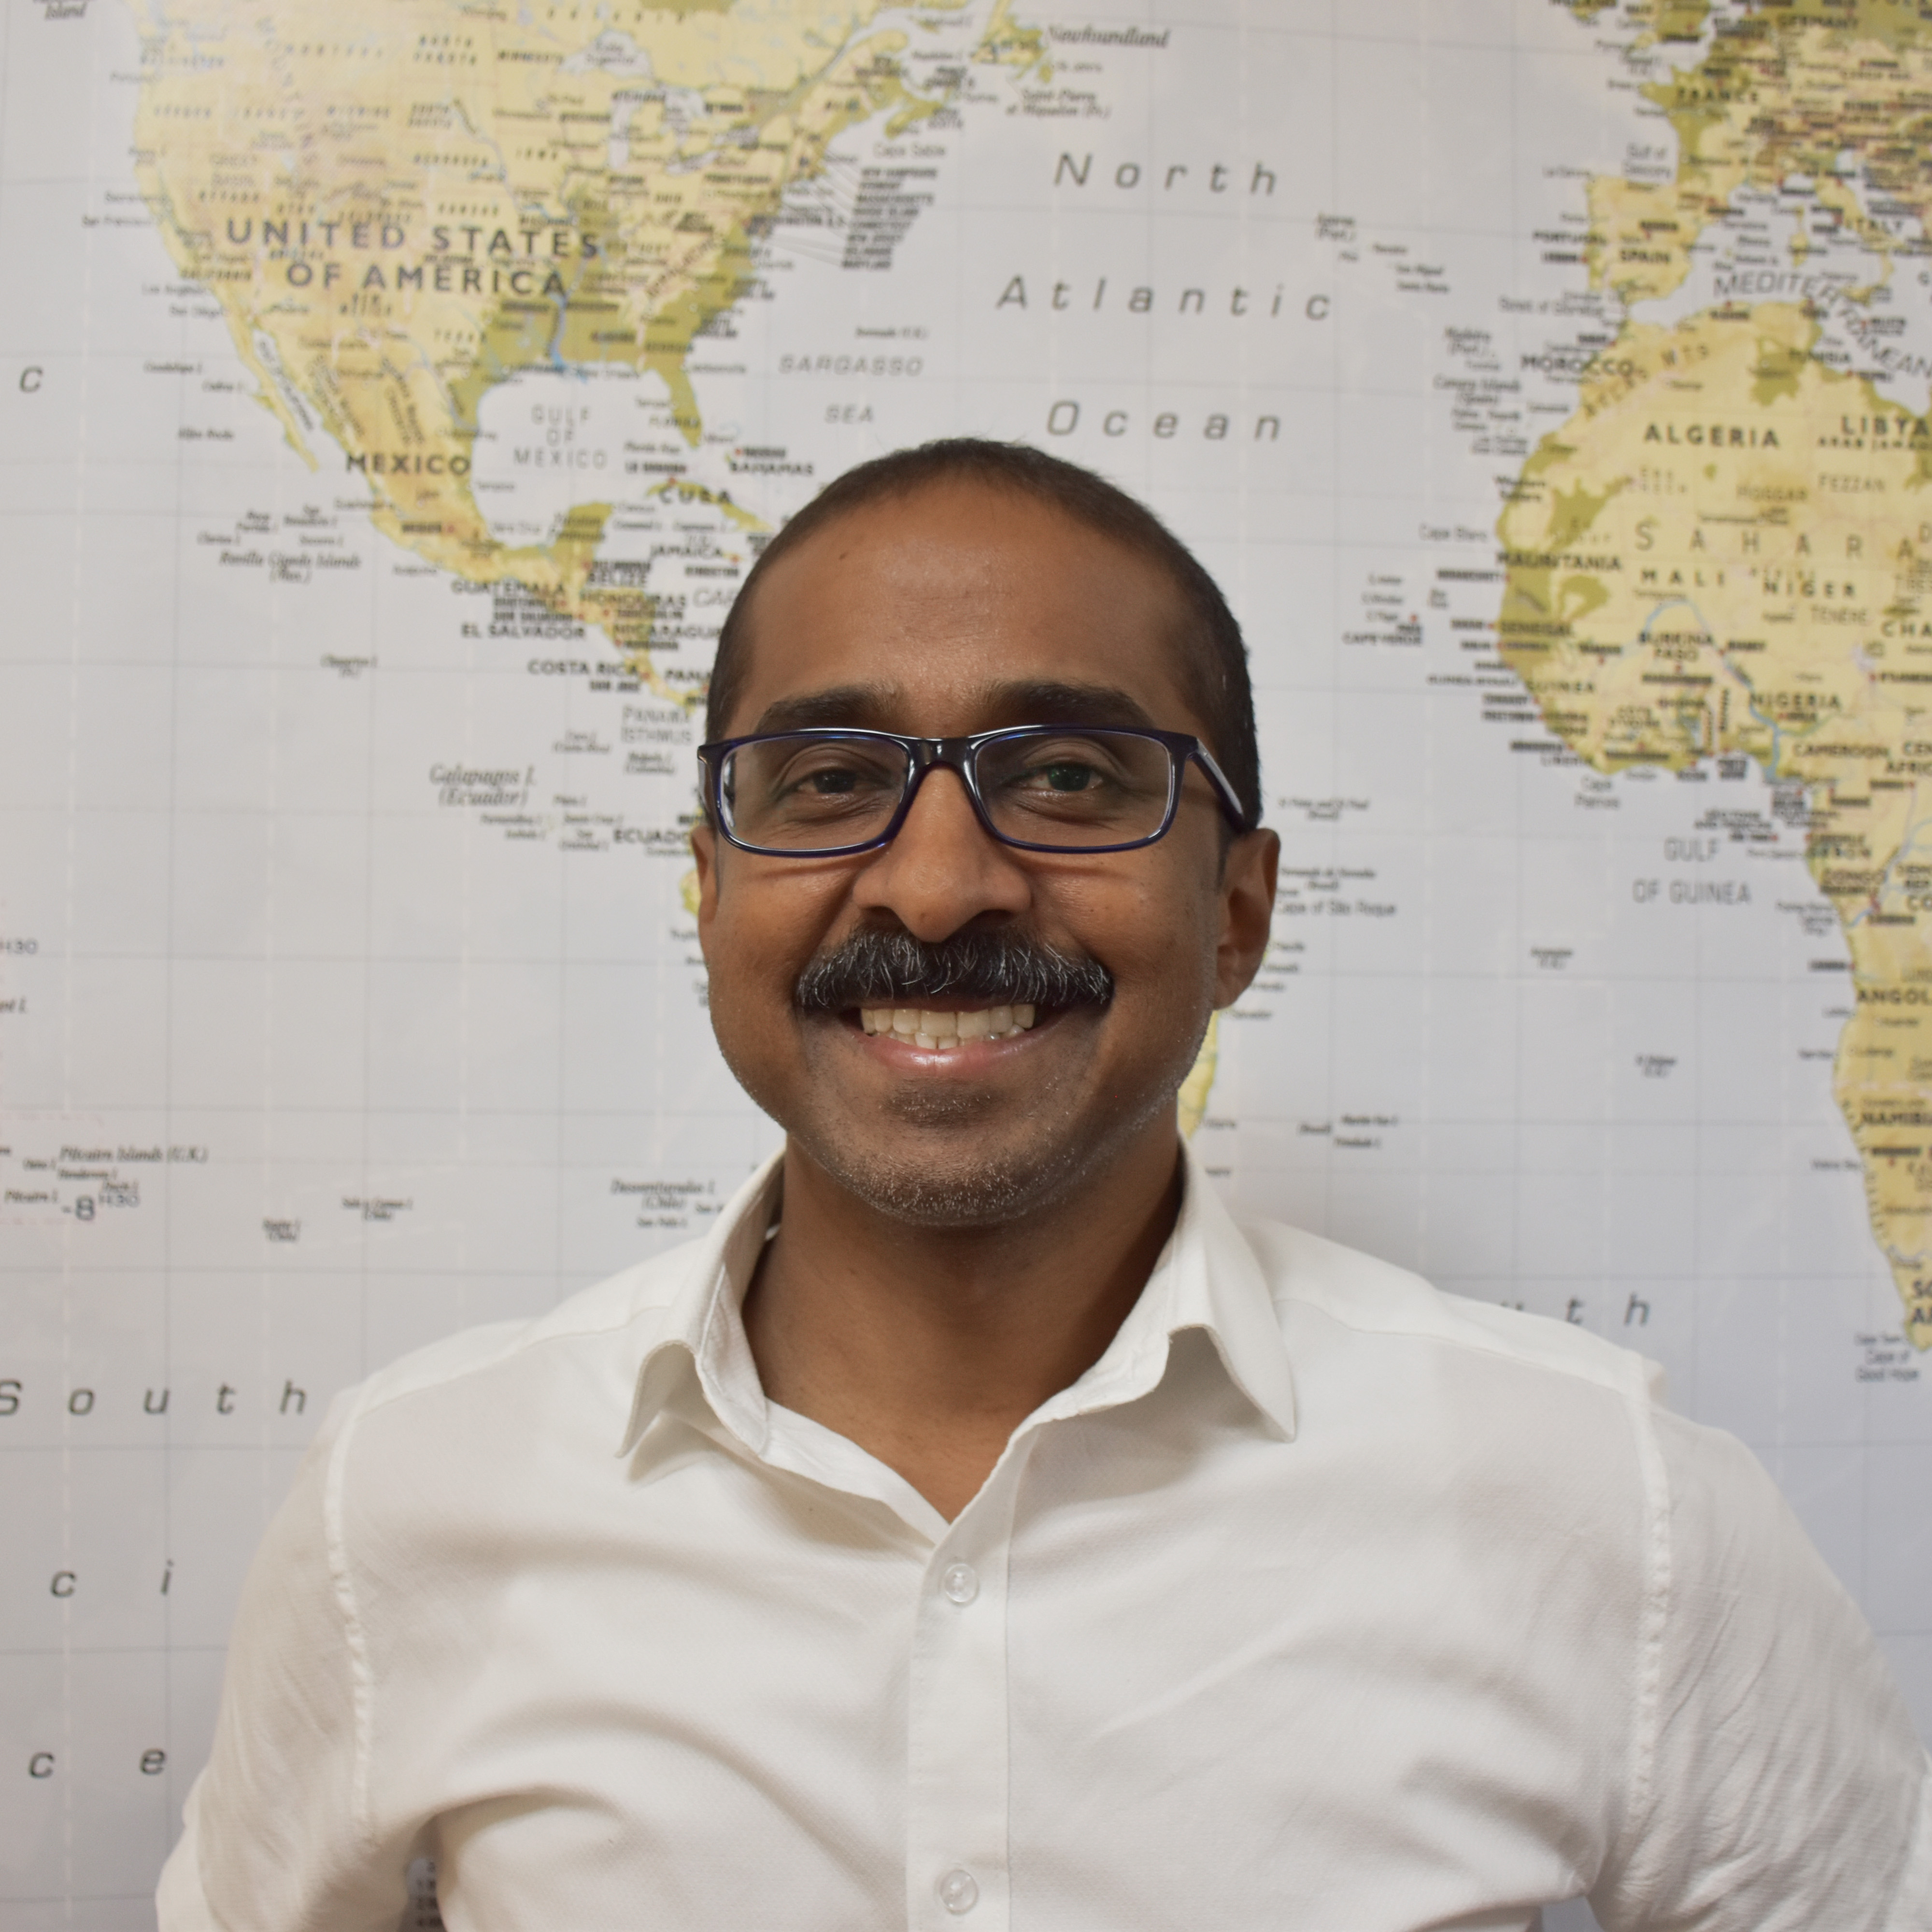 Jay Arasan, Associate Director, smiling in front of a global map